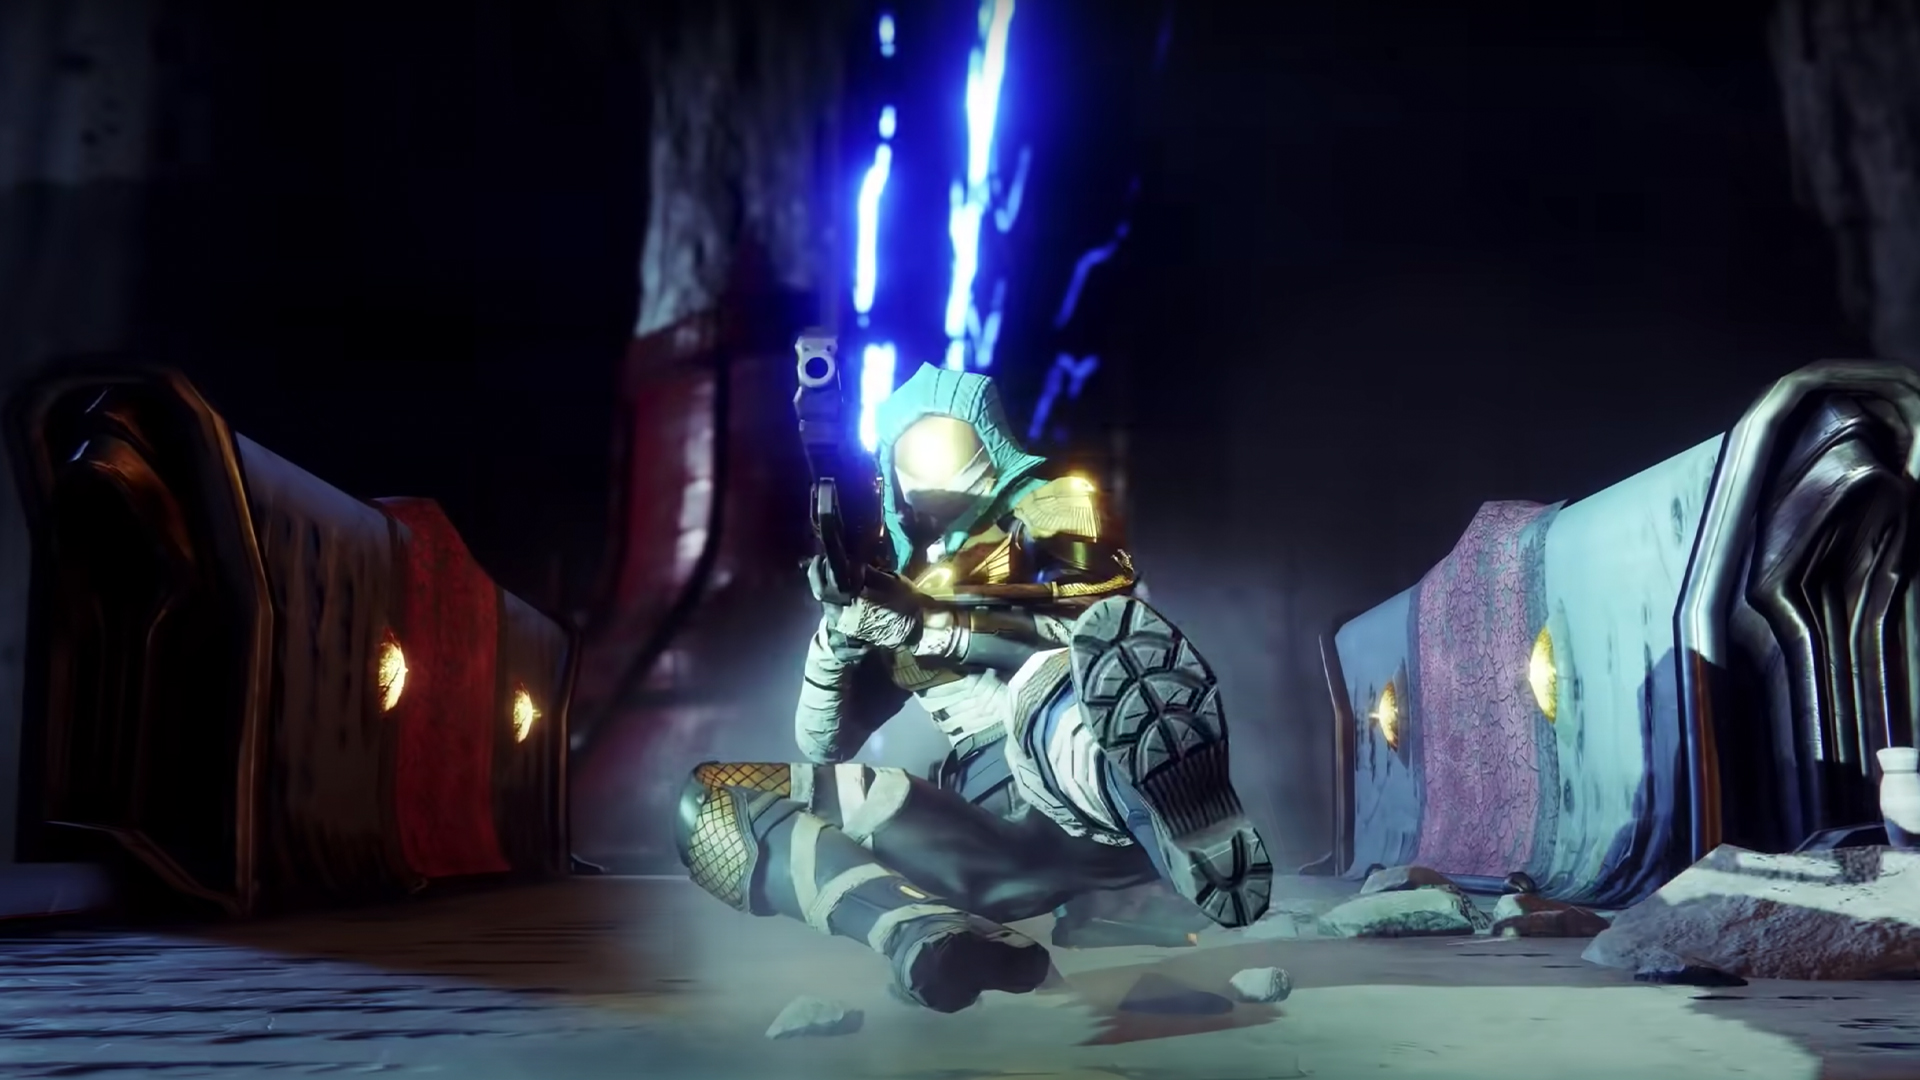 Destiny 2 game director says info on PvP updates will come this month